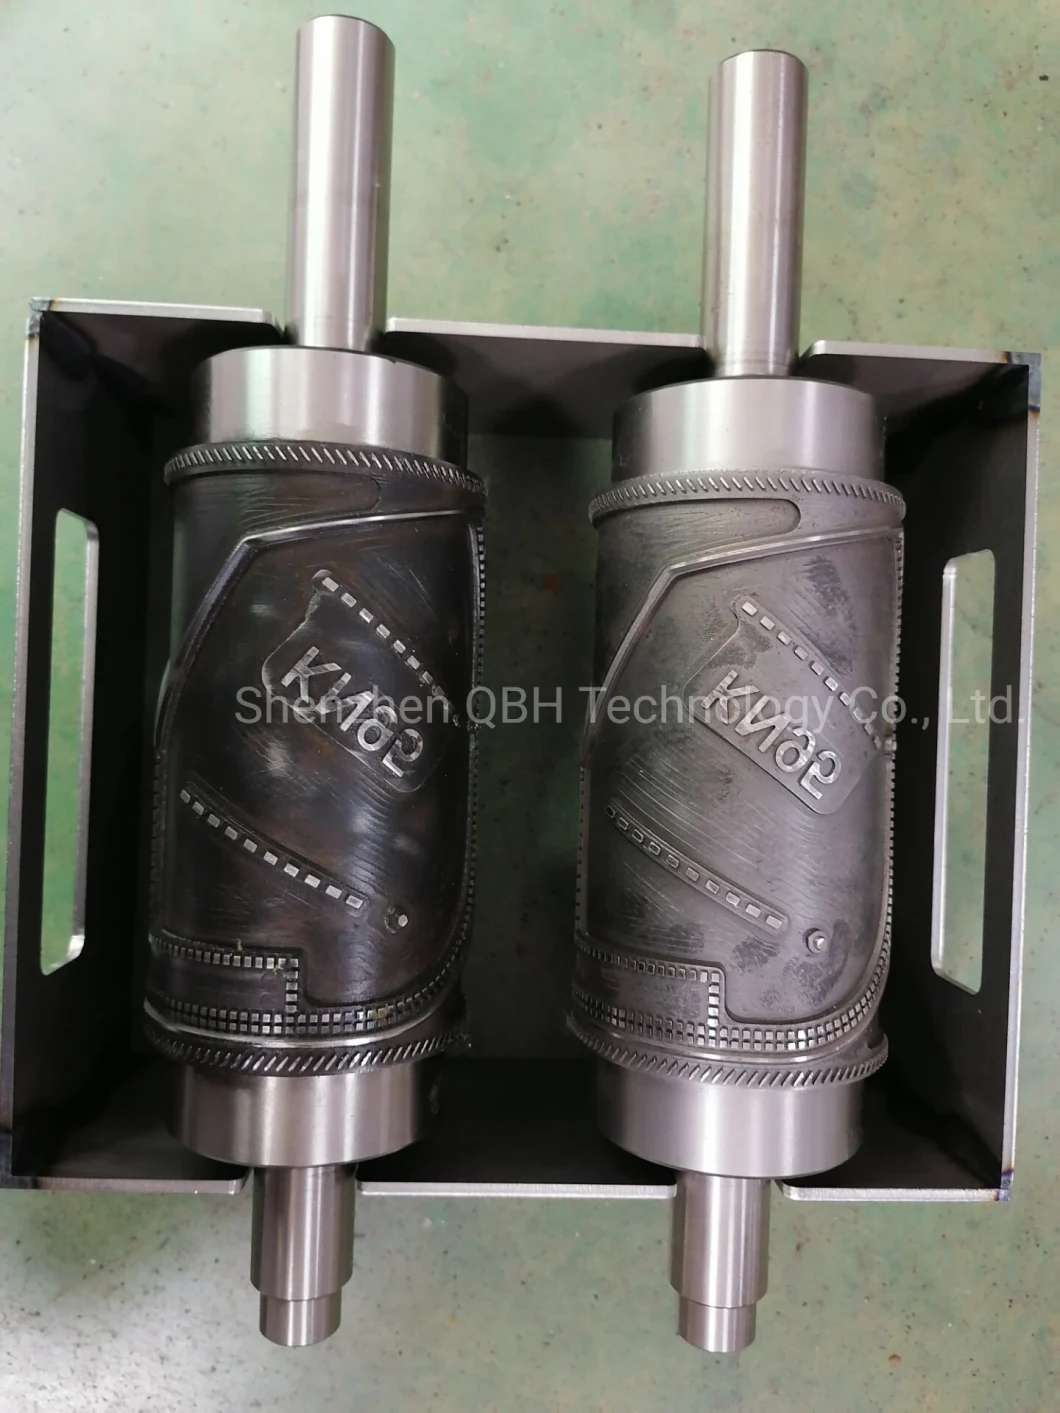 Knife Knurling Shaft and Embossing Roller for Kn95 Mask Machine